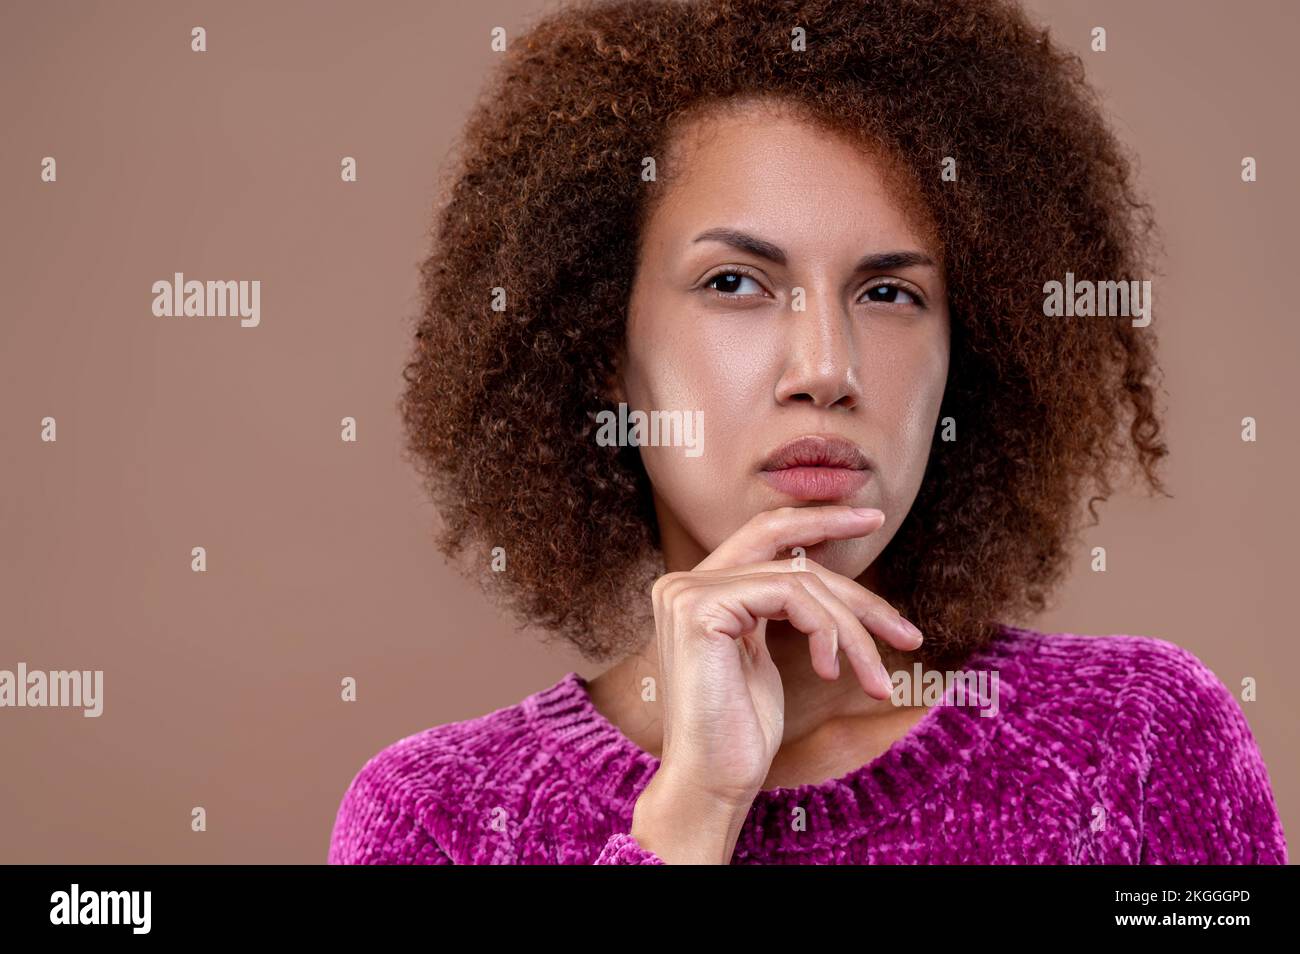 Dark-haired young woman looking thoughtful Stock Photo